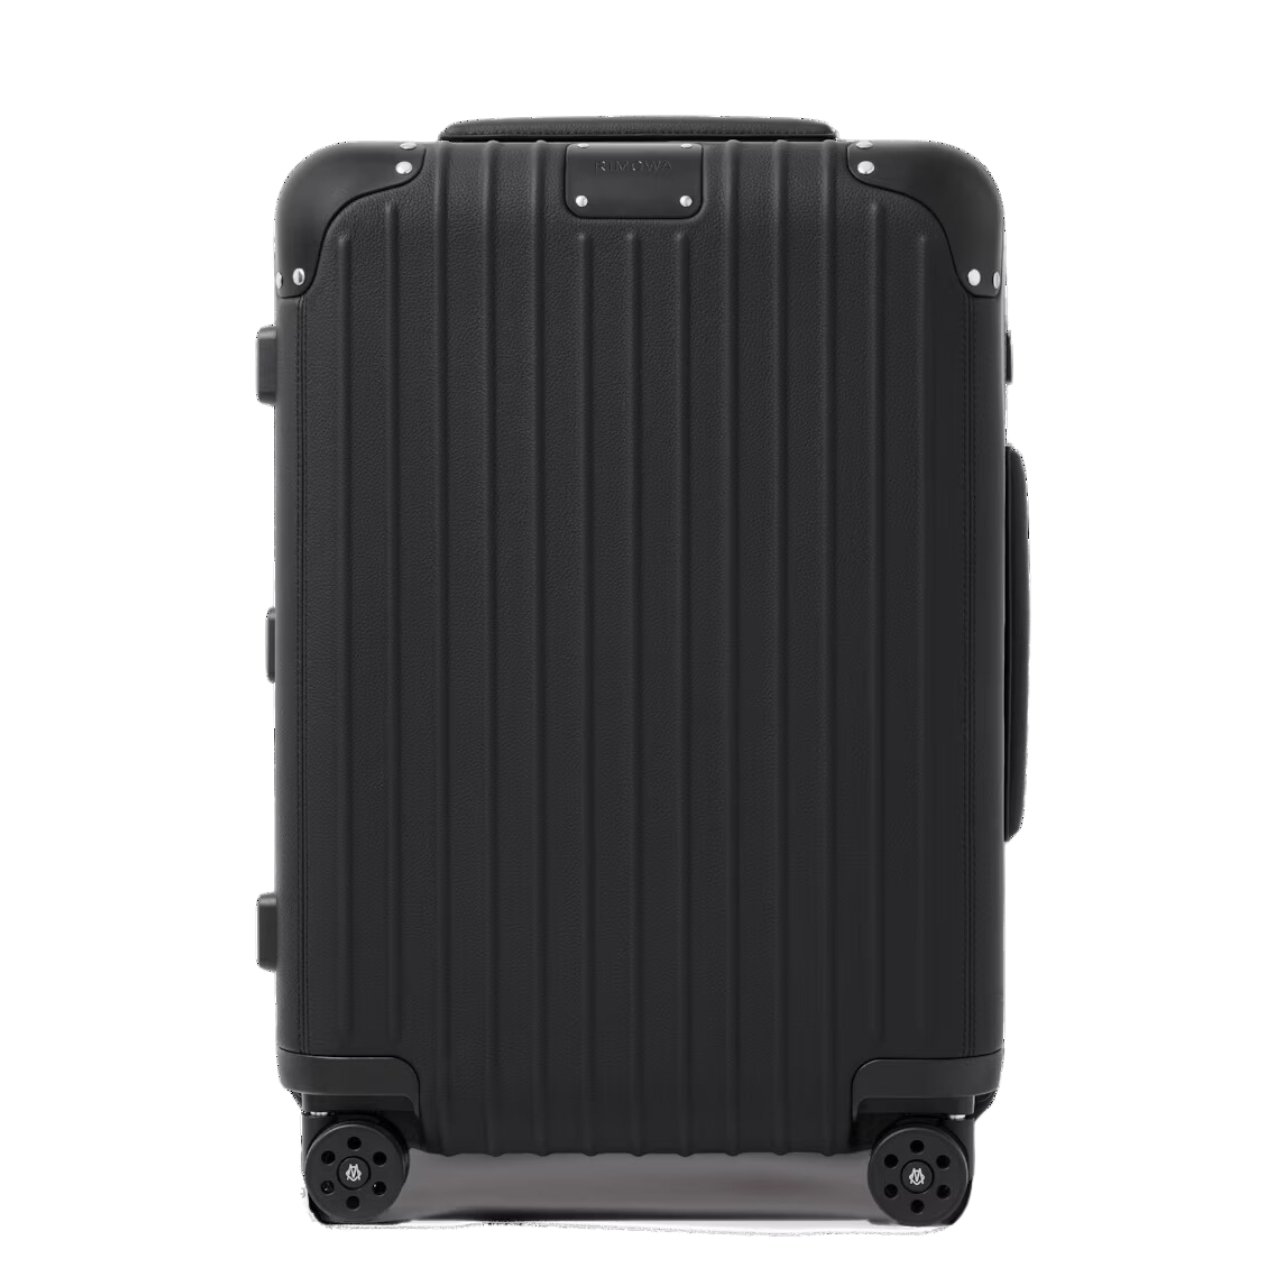 Black Rimowa cabin luggage made of leather and anodized aluminum